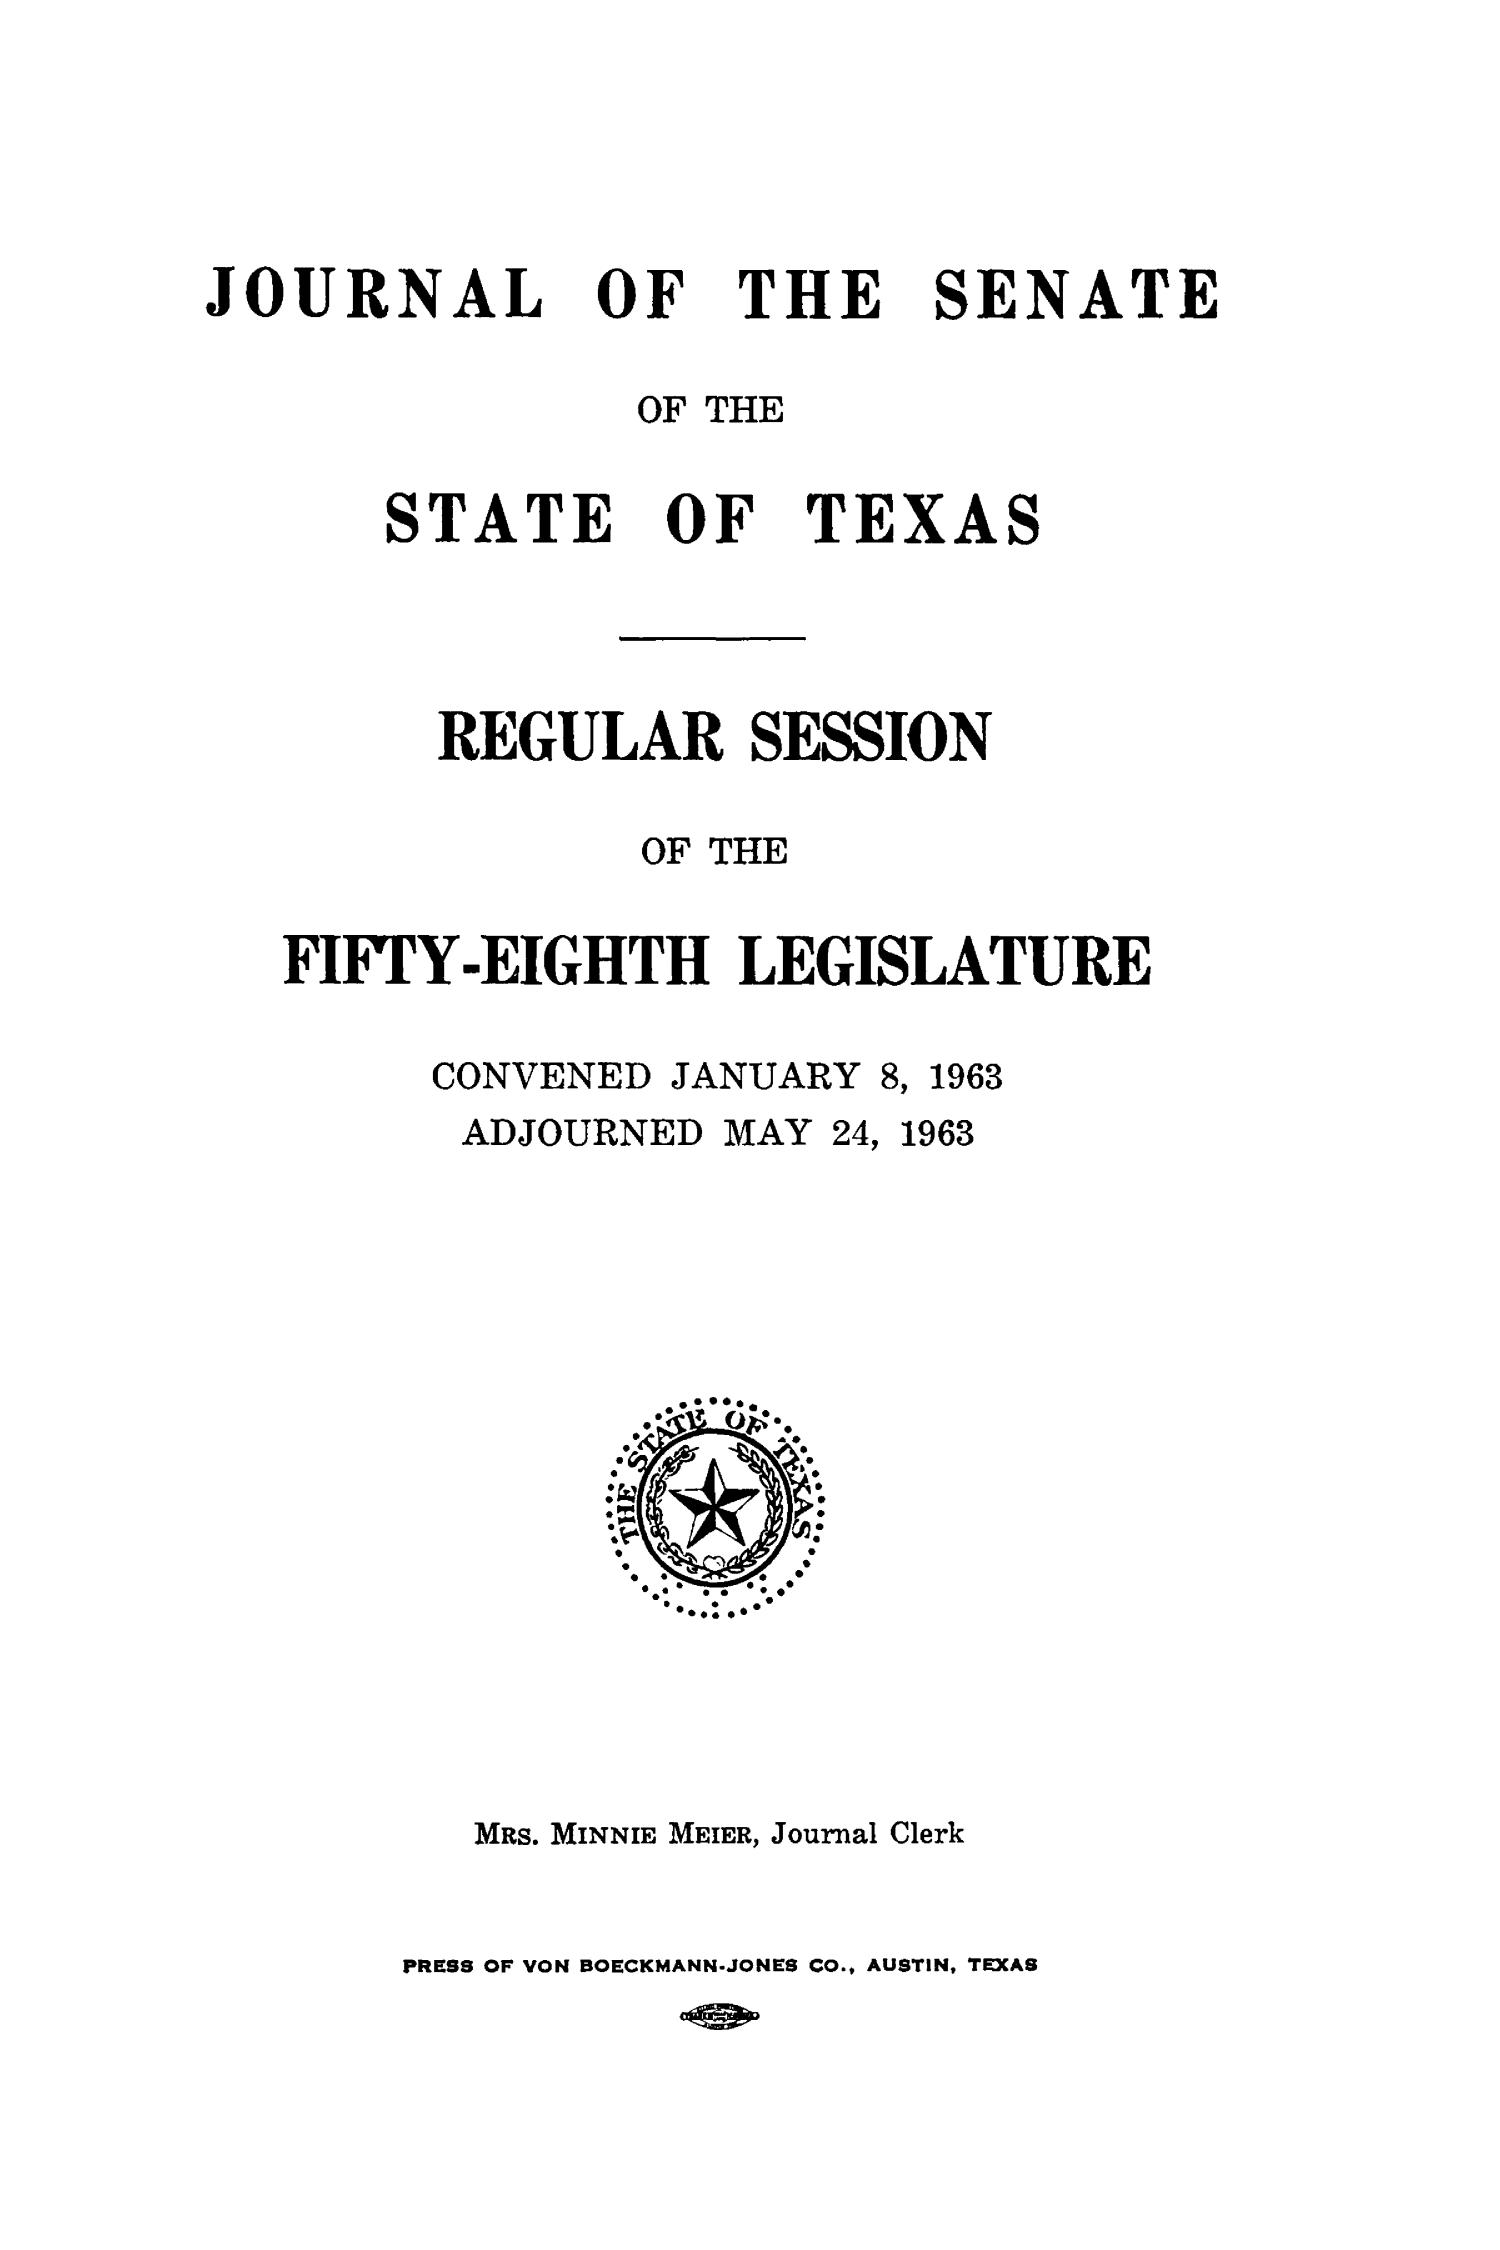 Journal of the Senate of the State of Texas, Regular Session of the Fifty-Eighth Legislature
                                                
                                                    Title Page
                                                